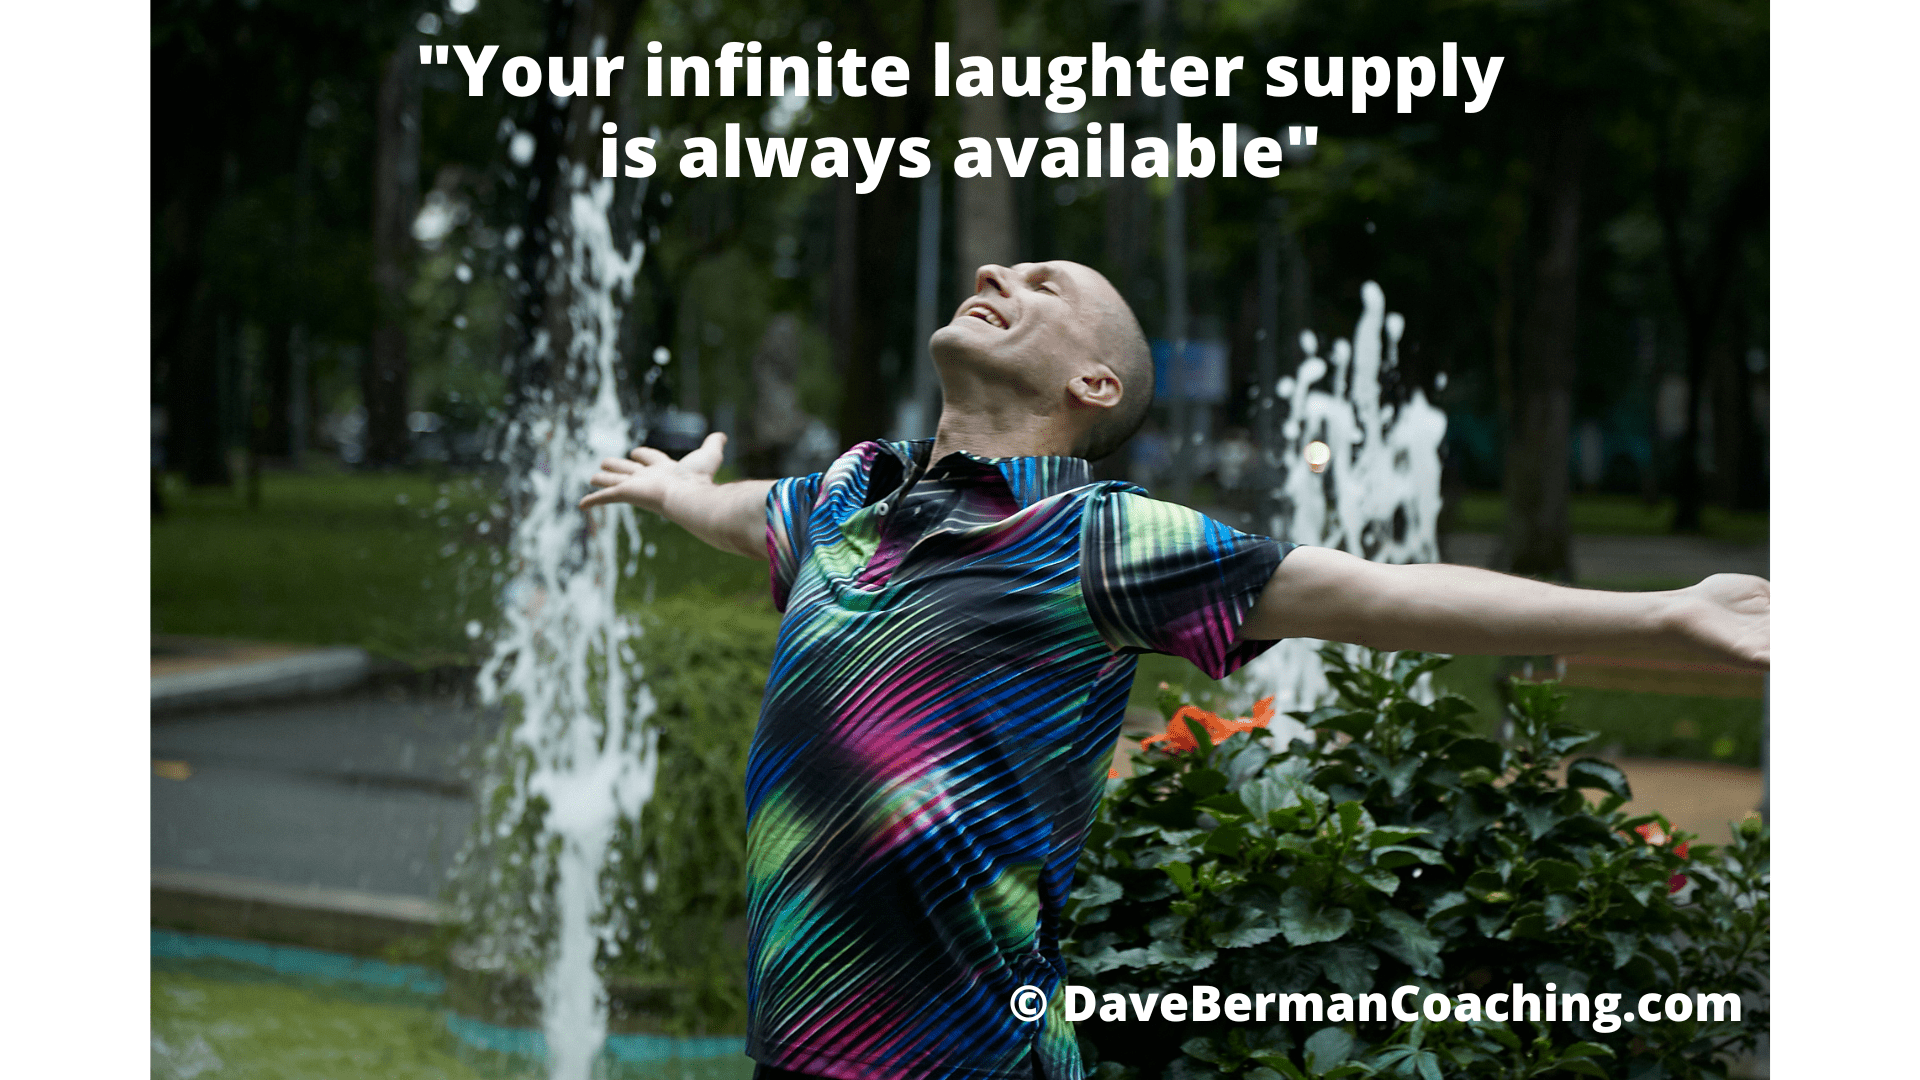 "Your infinite laughter supply is always available" - DaveBermanCoaching.com